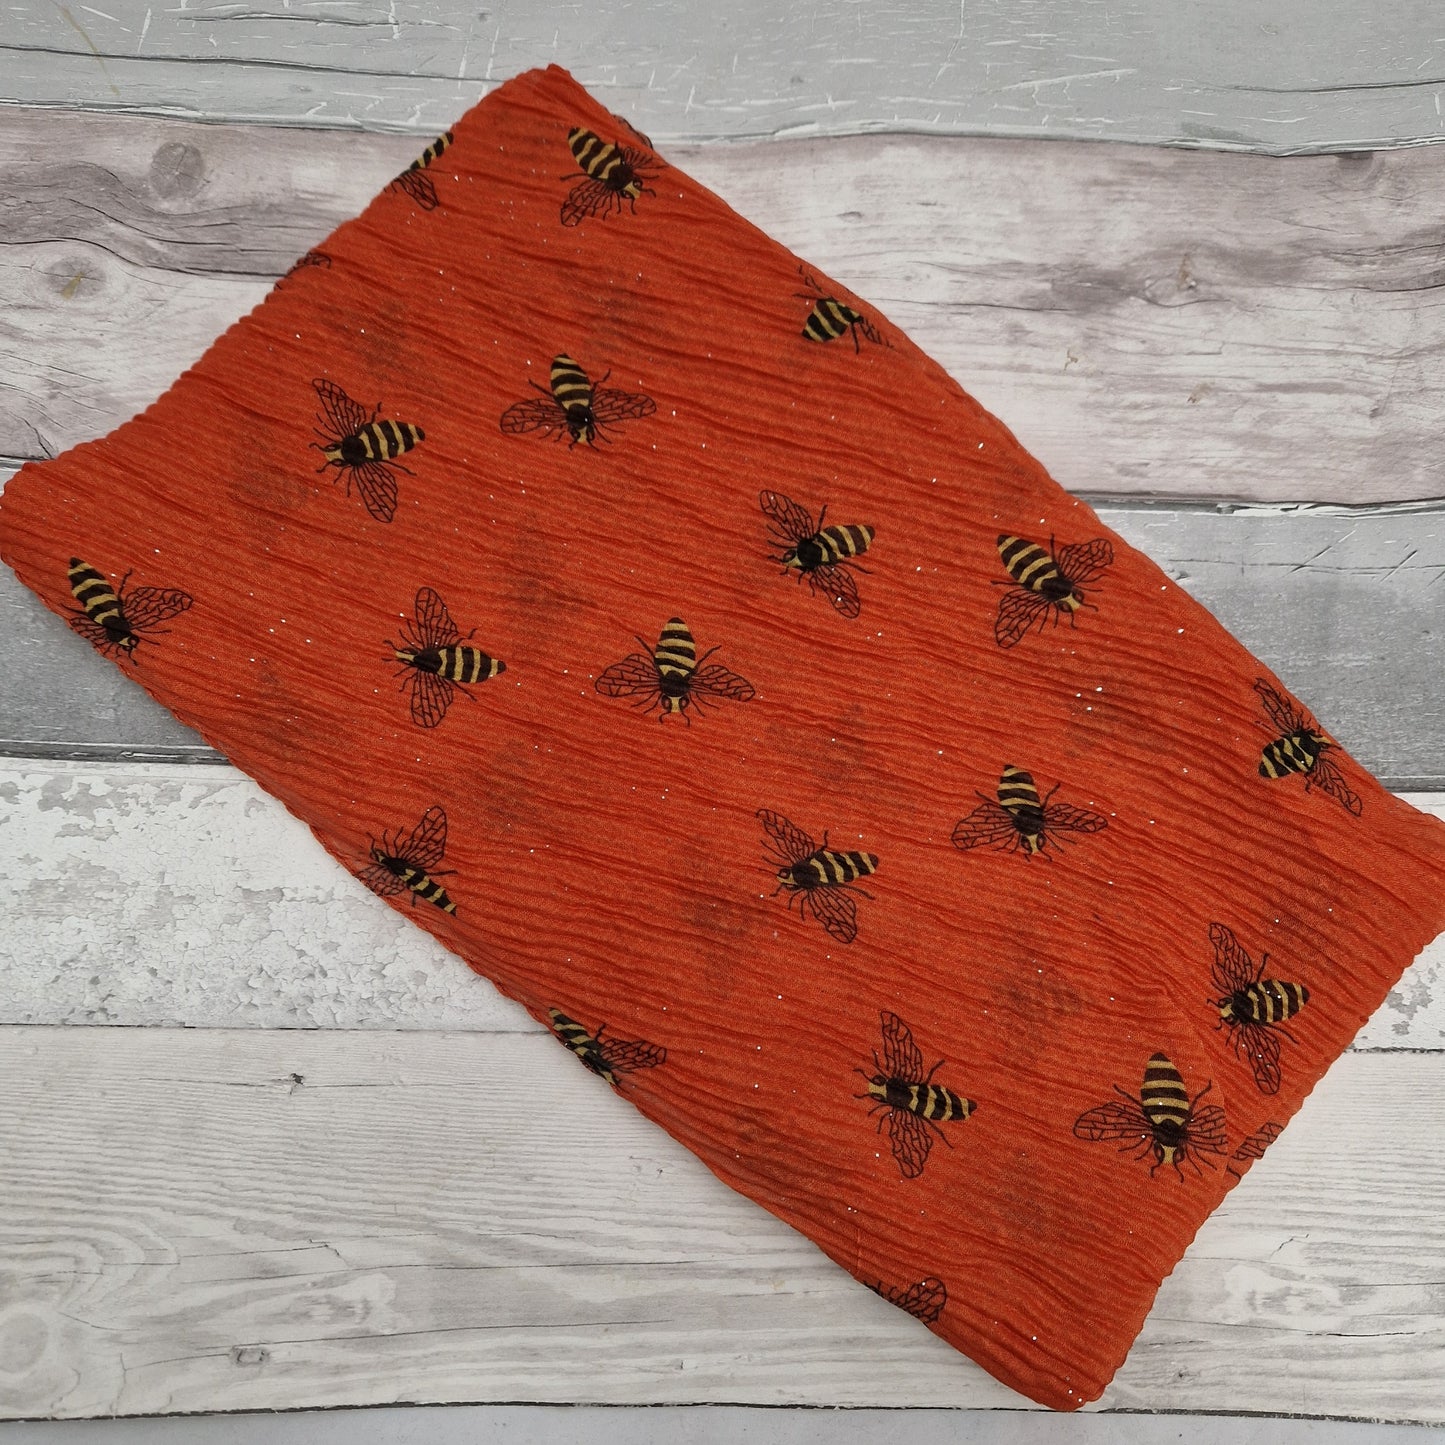 Orange scarf in a crinkle fabric featuring black and yellow bees.